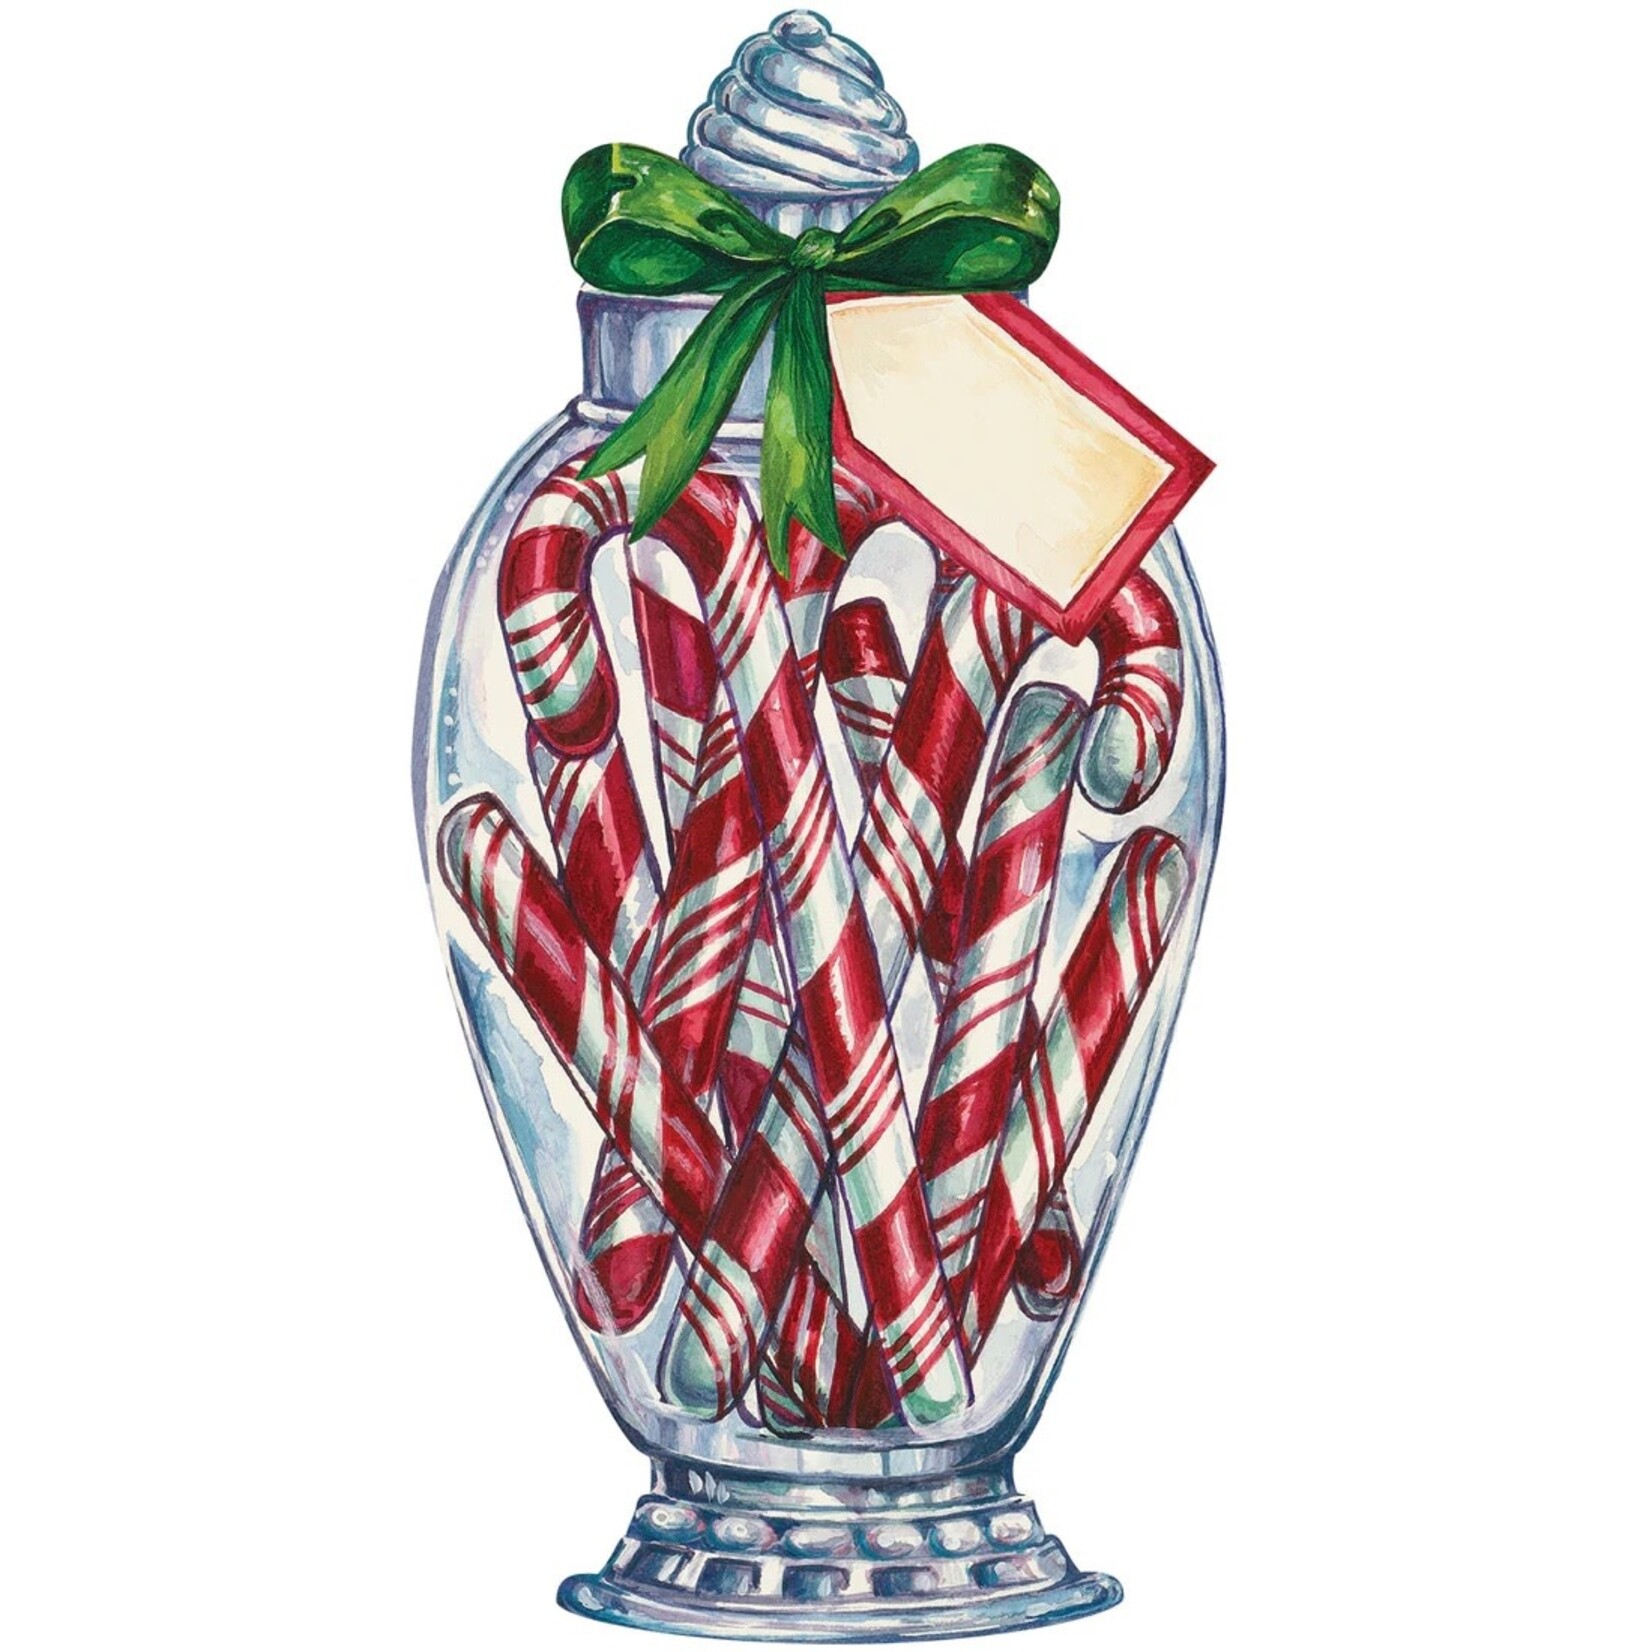 Hester & Cook Candy Cane Jar Table Accent - Pack of 12